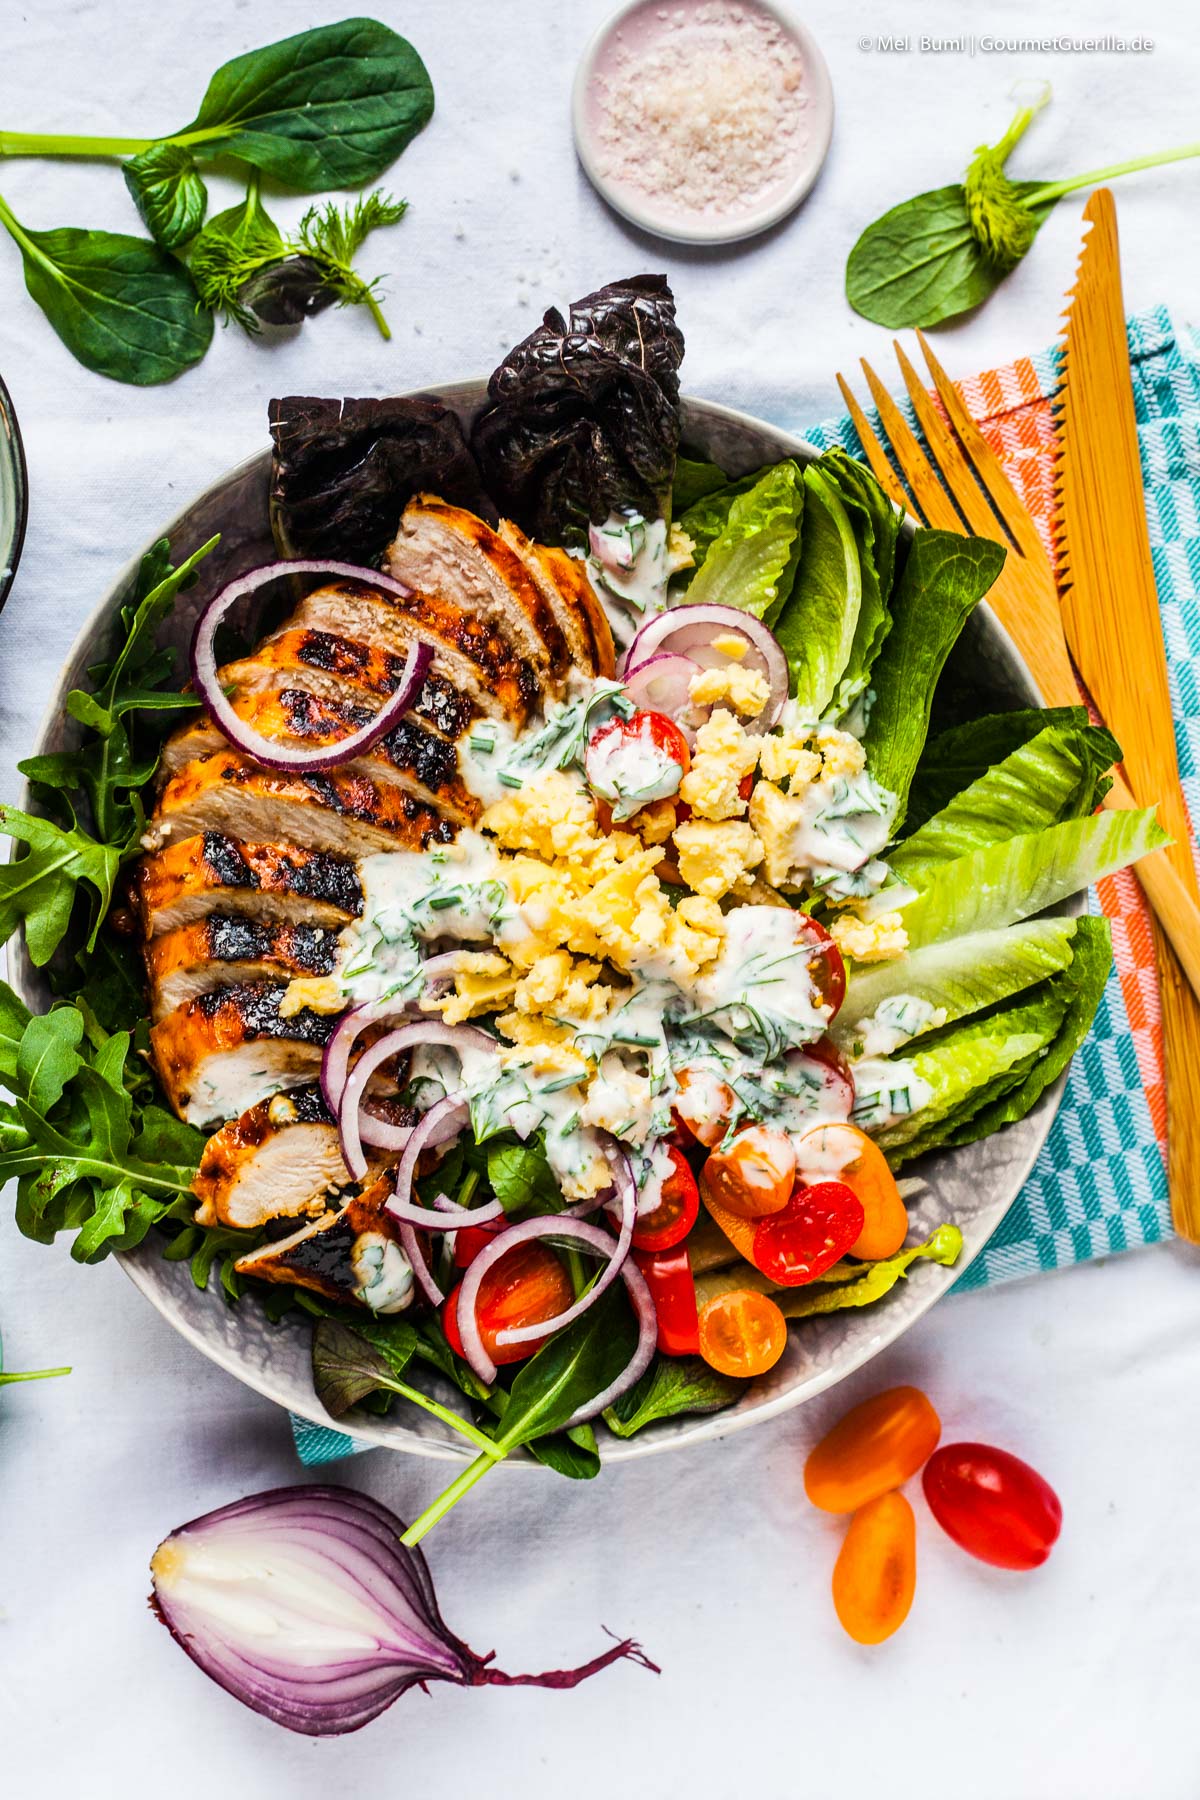 Biting BBQ chicken on salad with homemade Low-Fat Ranch Dressing | GourmetGuerilla.com 